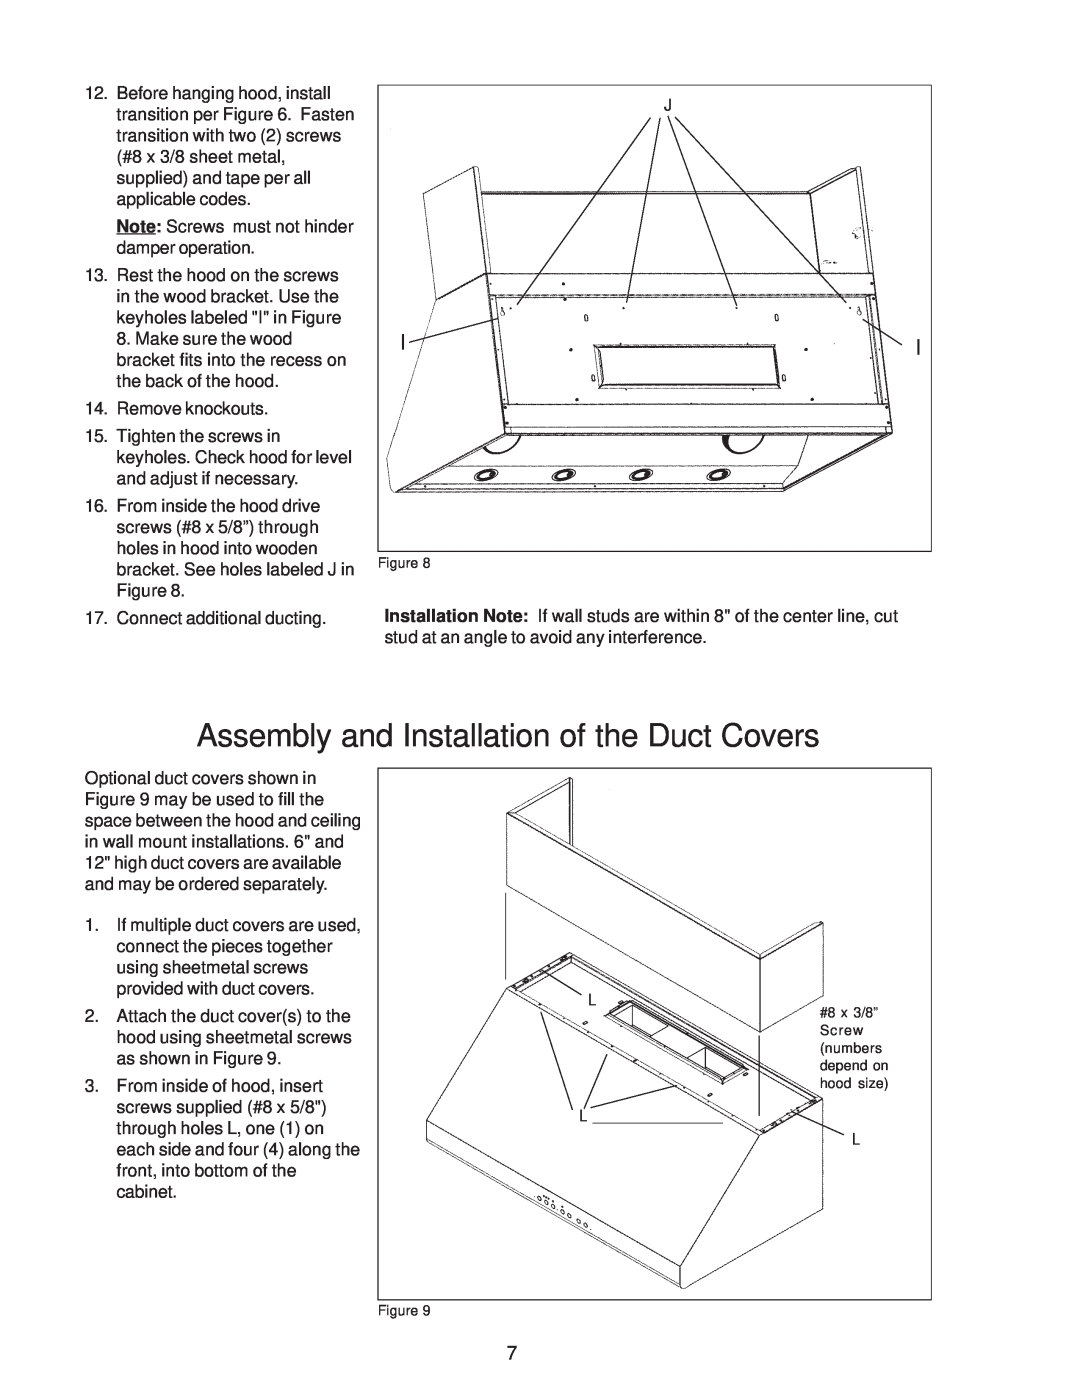 Thermador PH36, PH54, PH48, PH42, PH30 installation instructions Assembly and Installation of the Duct Covers 